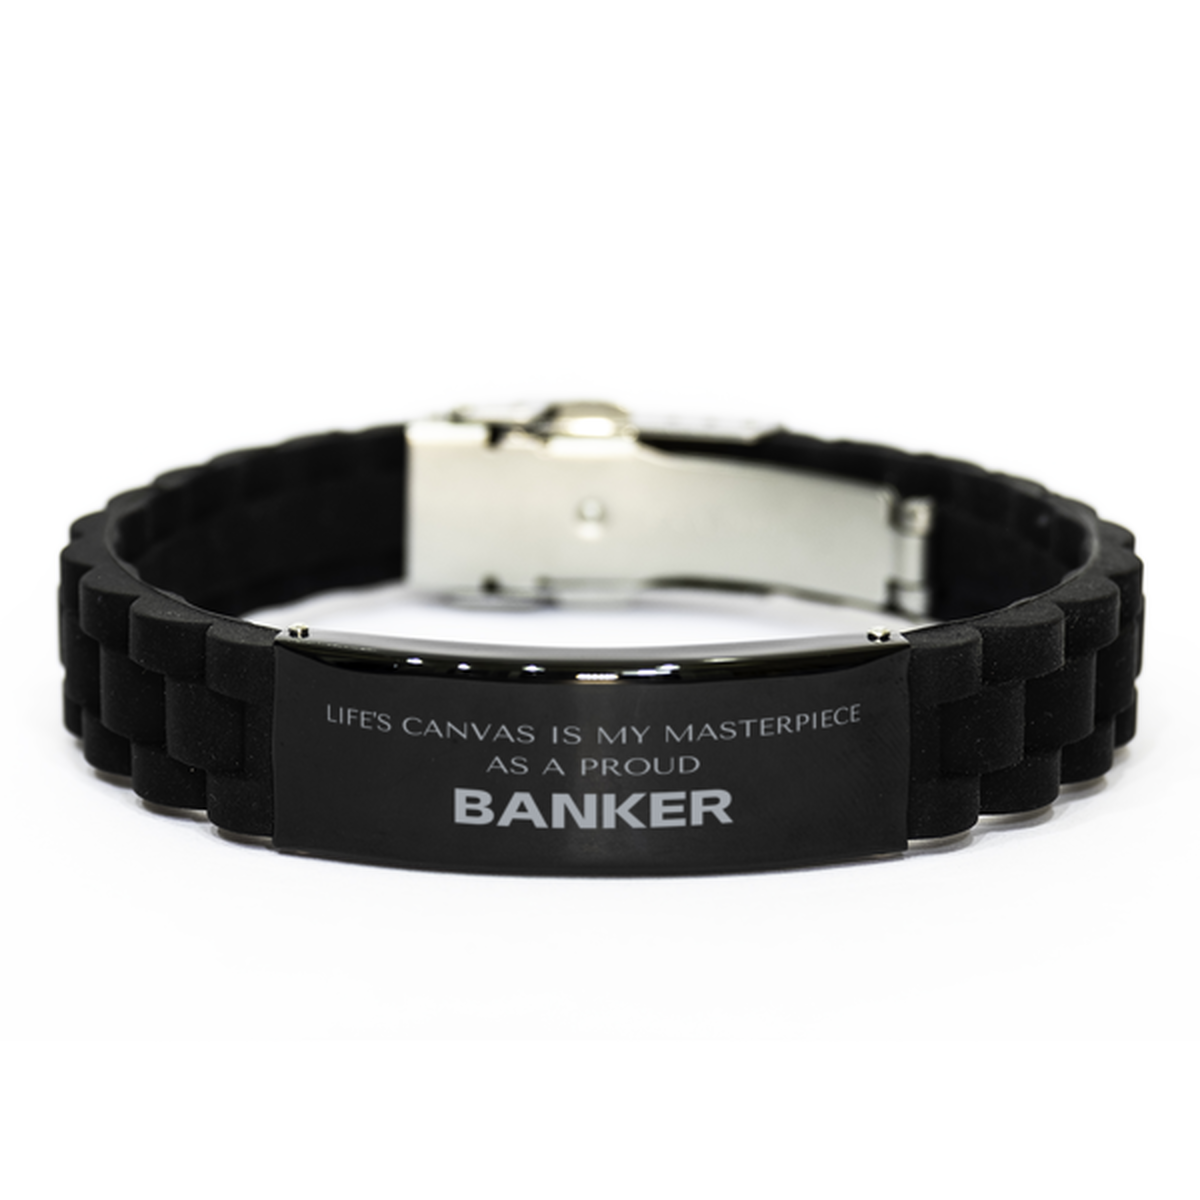 Proud Banker Gifts, Life's canvas is my masterpiece, Epic Birthday Christmas Unique Black Glidelock Clasp Bracelet For Banker, Coworkers, Men, Women, Friends